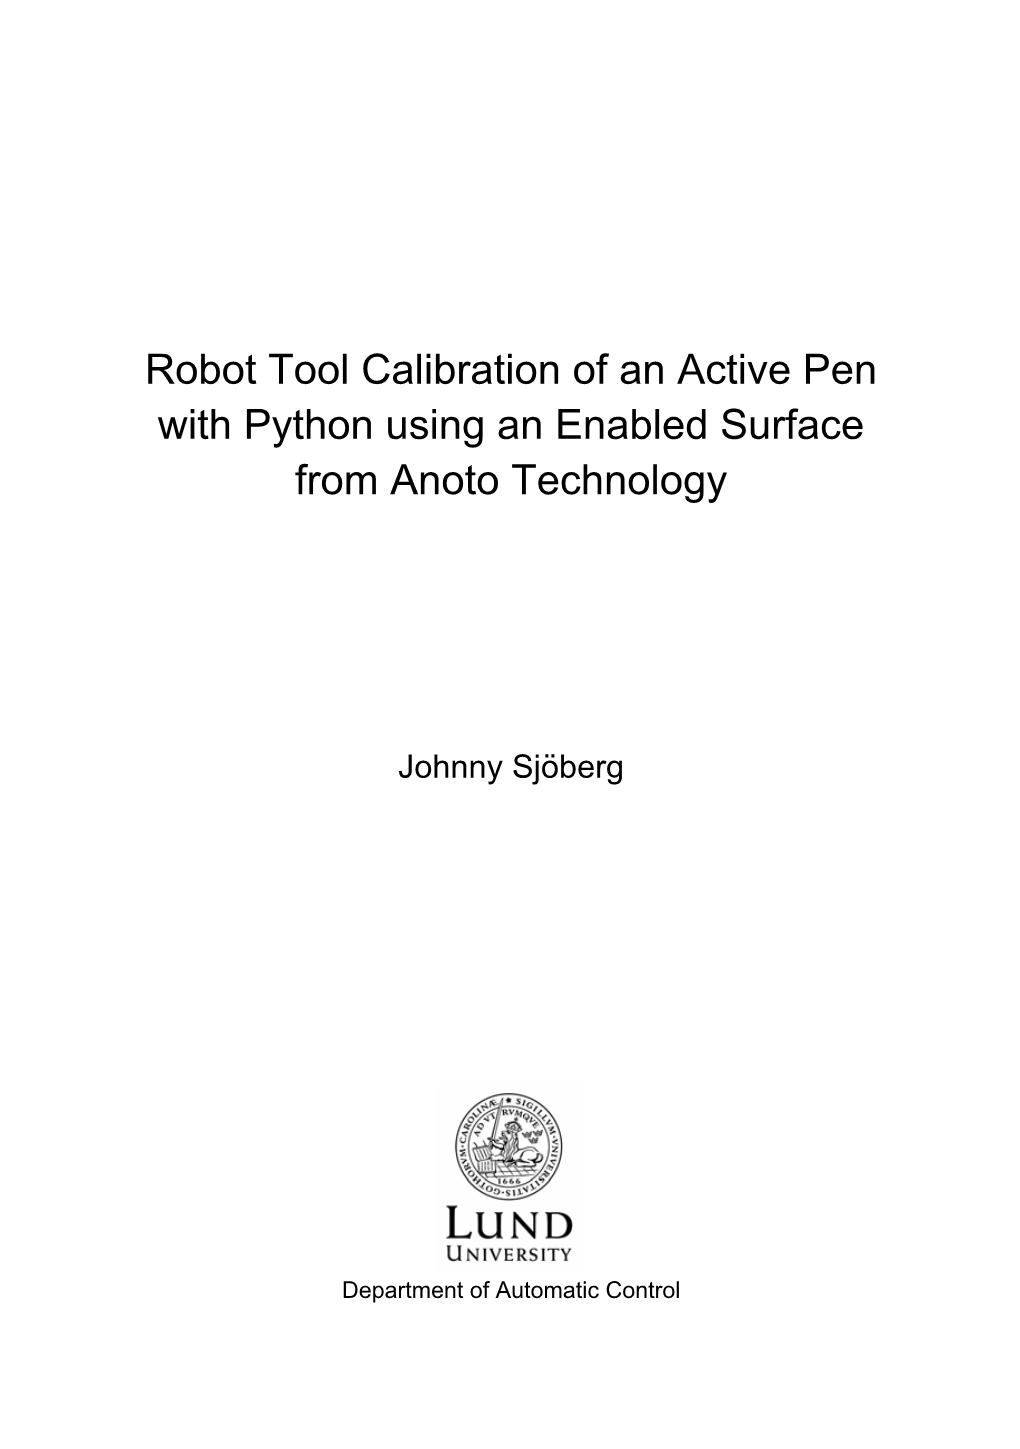 Robot Tool Calibration of an Active Pen with Python Using an Enabled Surface from Anoto Technology